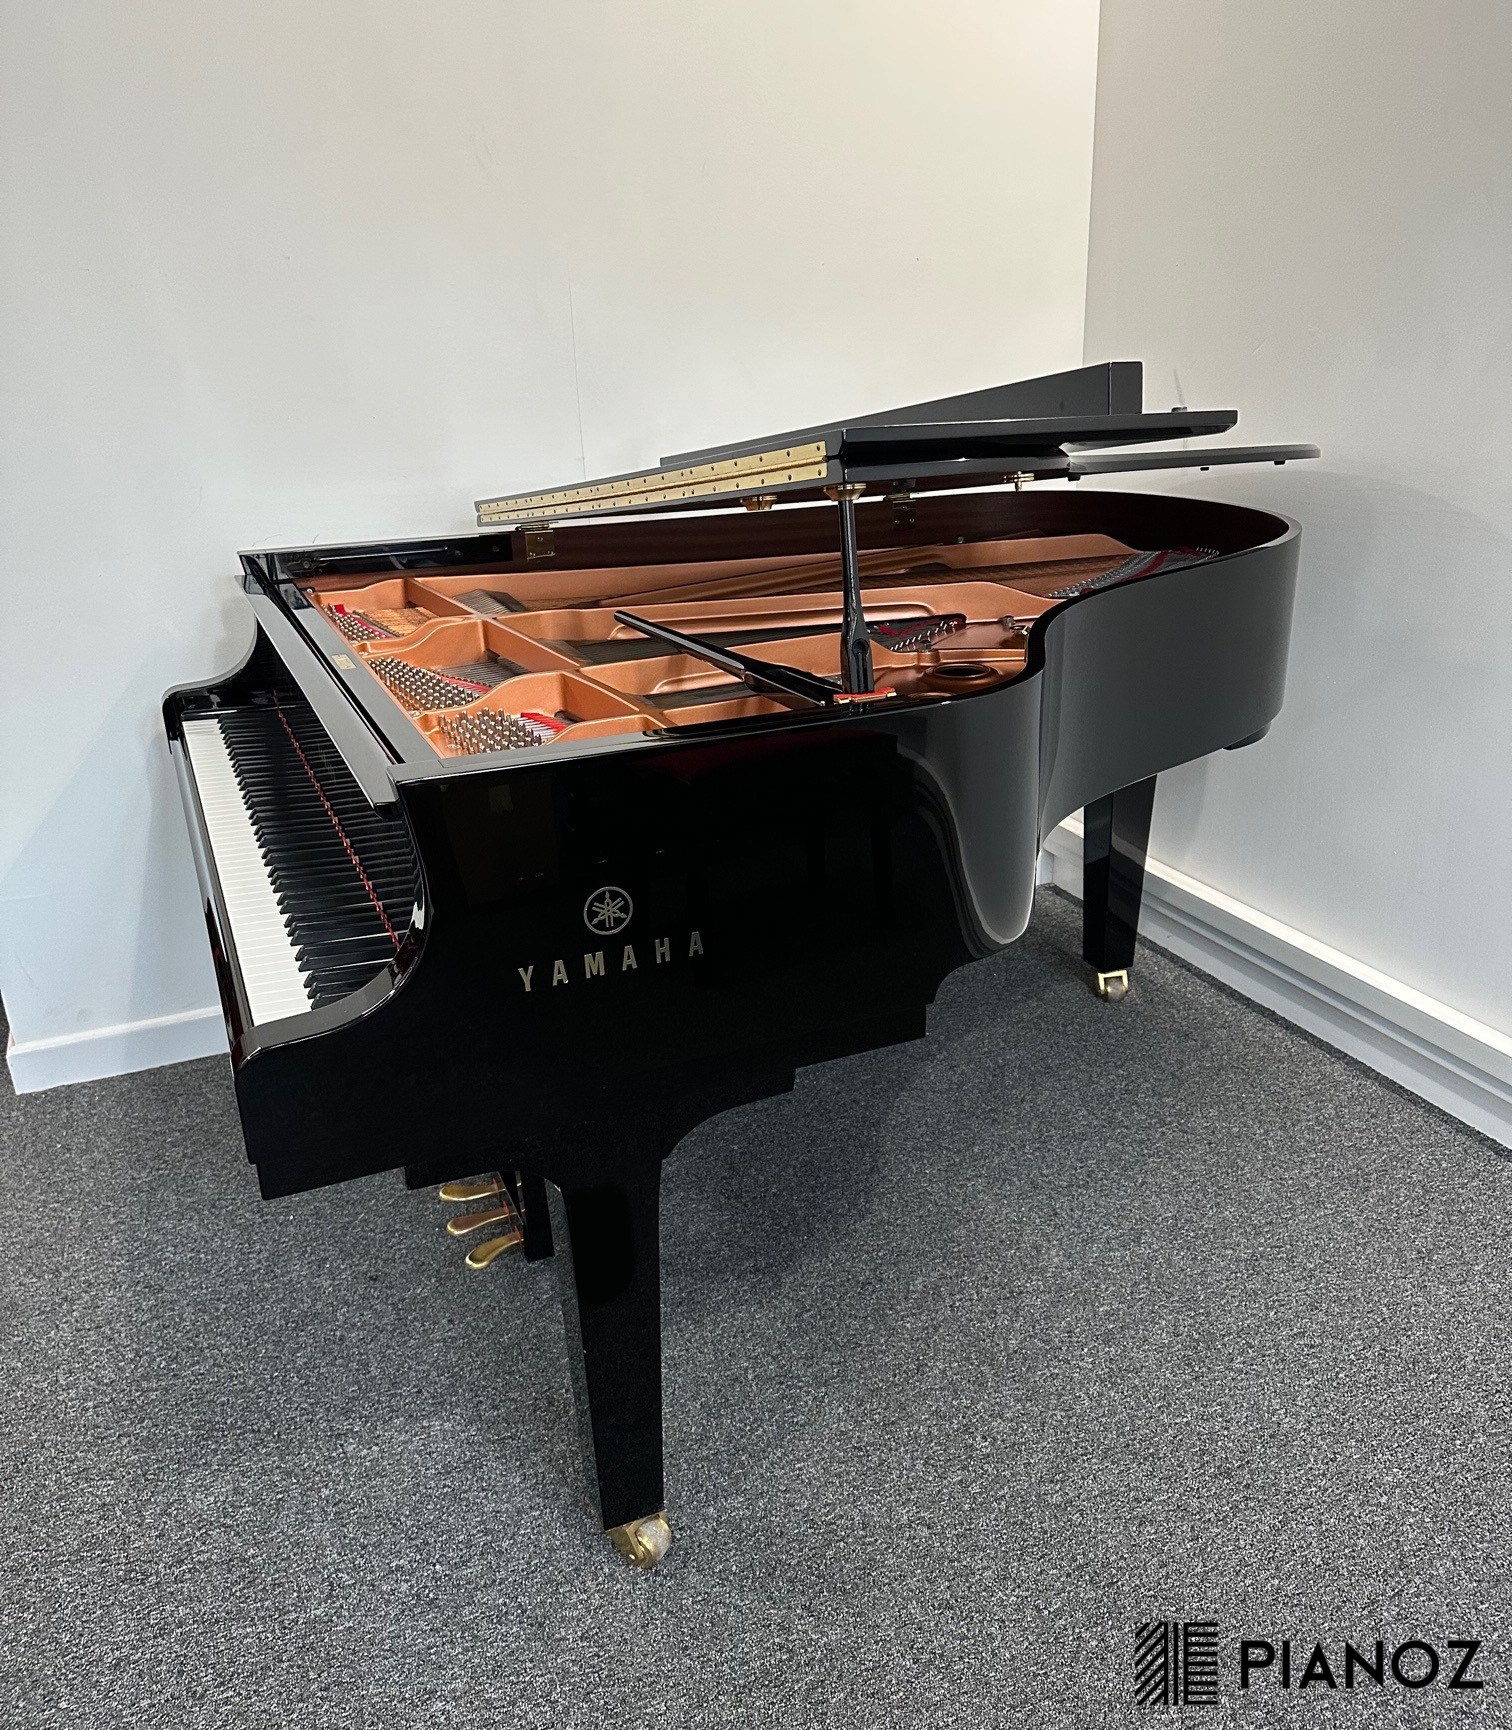 Yamaha C3X Adele World Tour Grand Piano piano for sale in UK